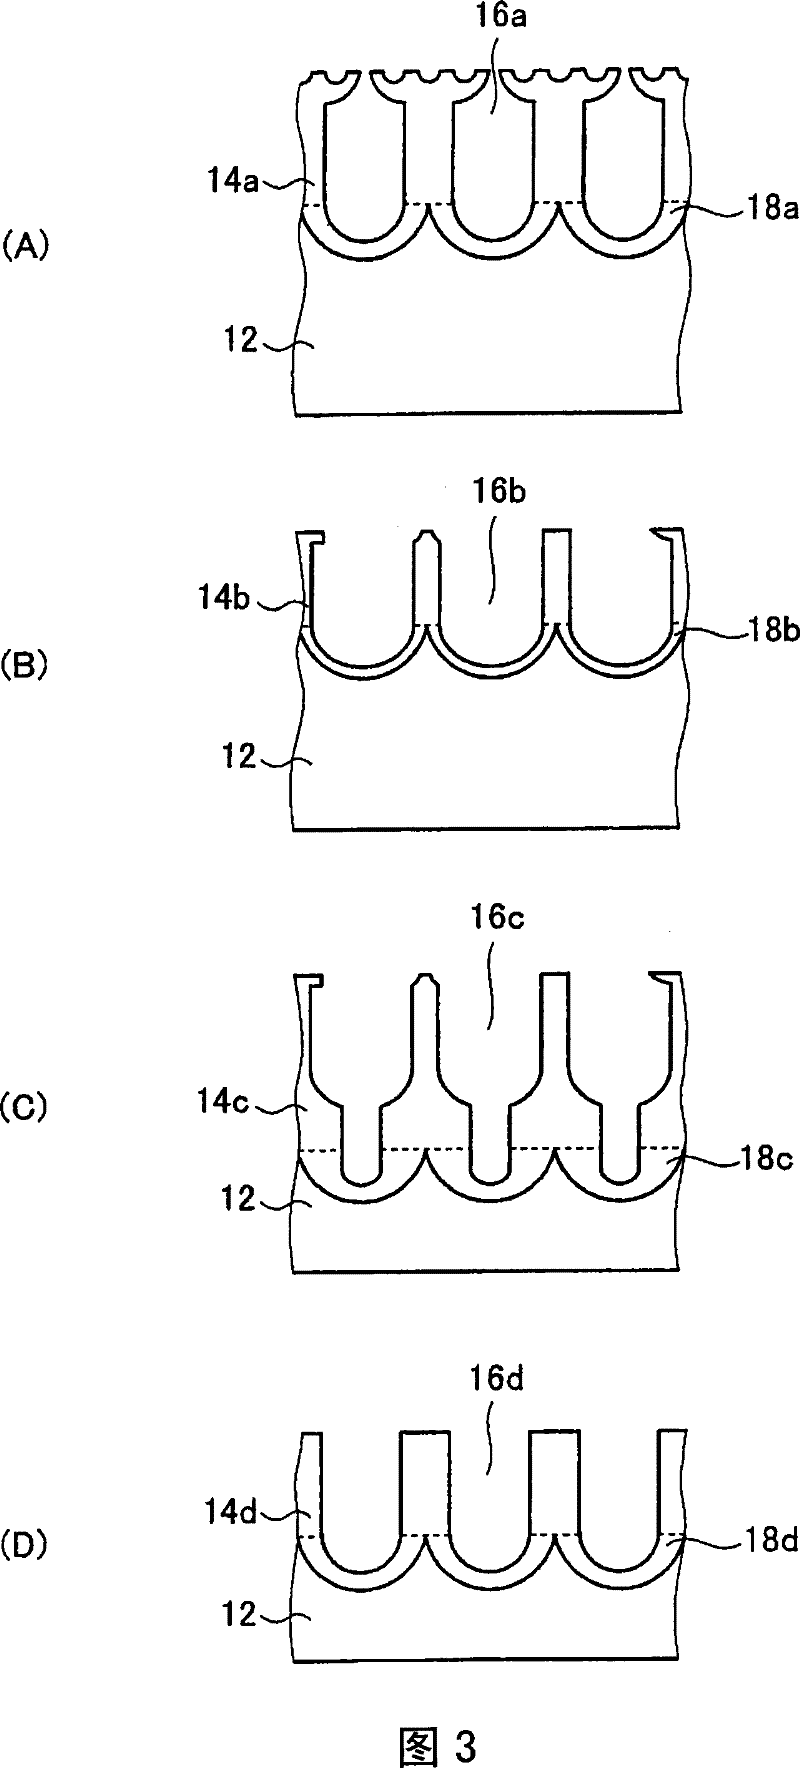 Anisotropically conductive member and method of manufacturing the same